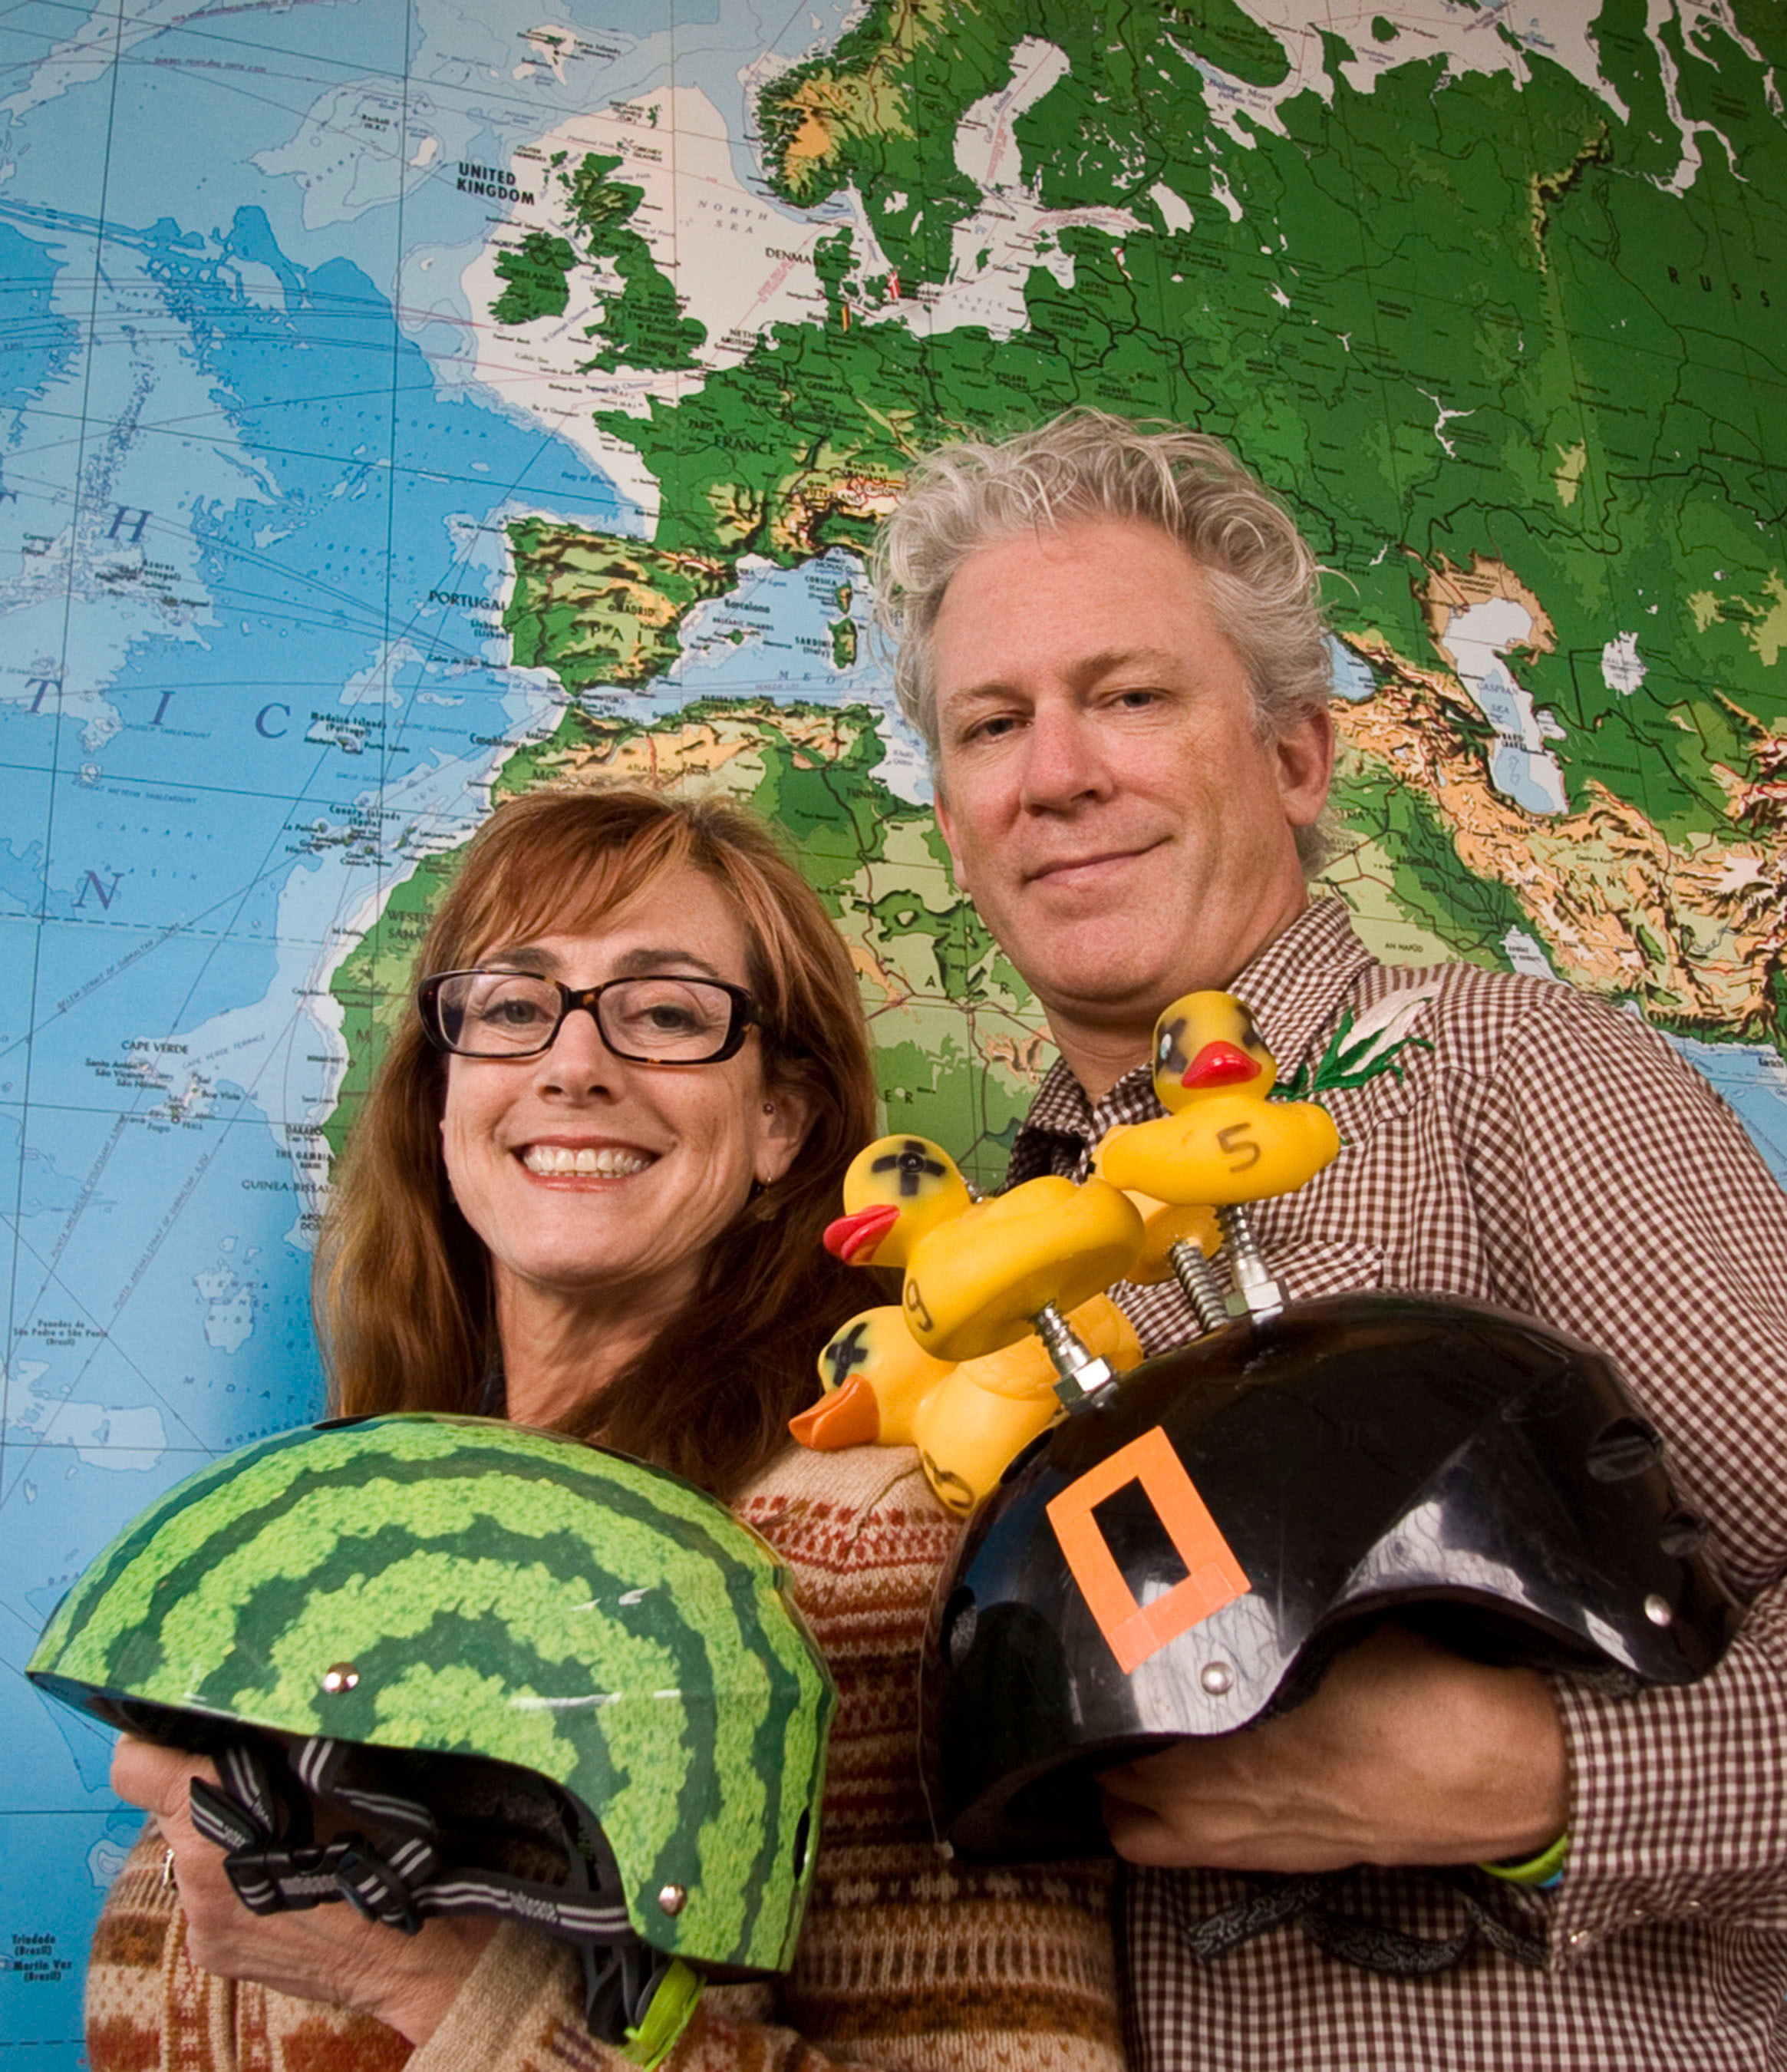 Nutcase "Nutty" Over Europe: Left to right, Nutcase Helmets Co-Founders Miriam Berman with the original Watermelon helmet design, and Michael Morrow with the concept helmet that started the global brand. (PRNewsFoto/Nutcase, Inc.) (PRNewsFoto/NUTCASE, INC.)